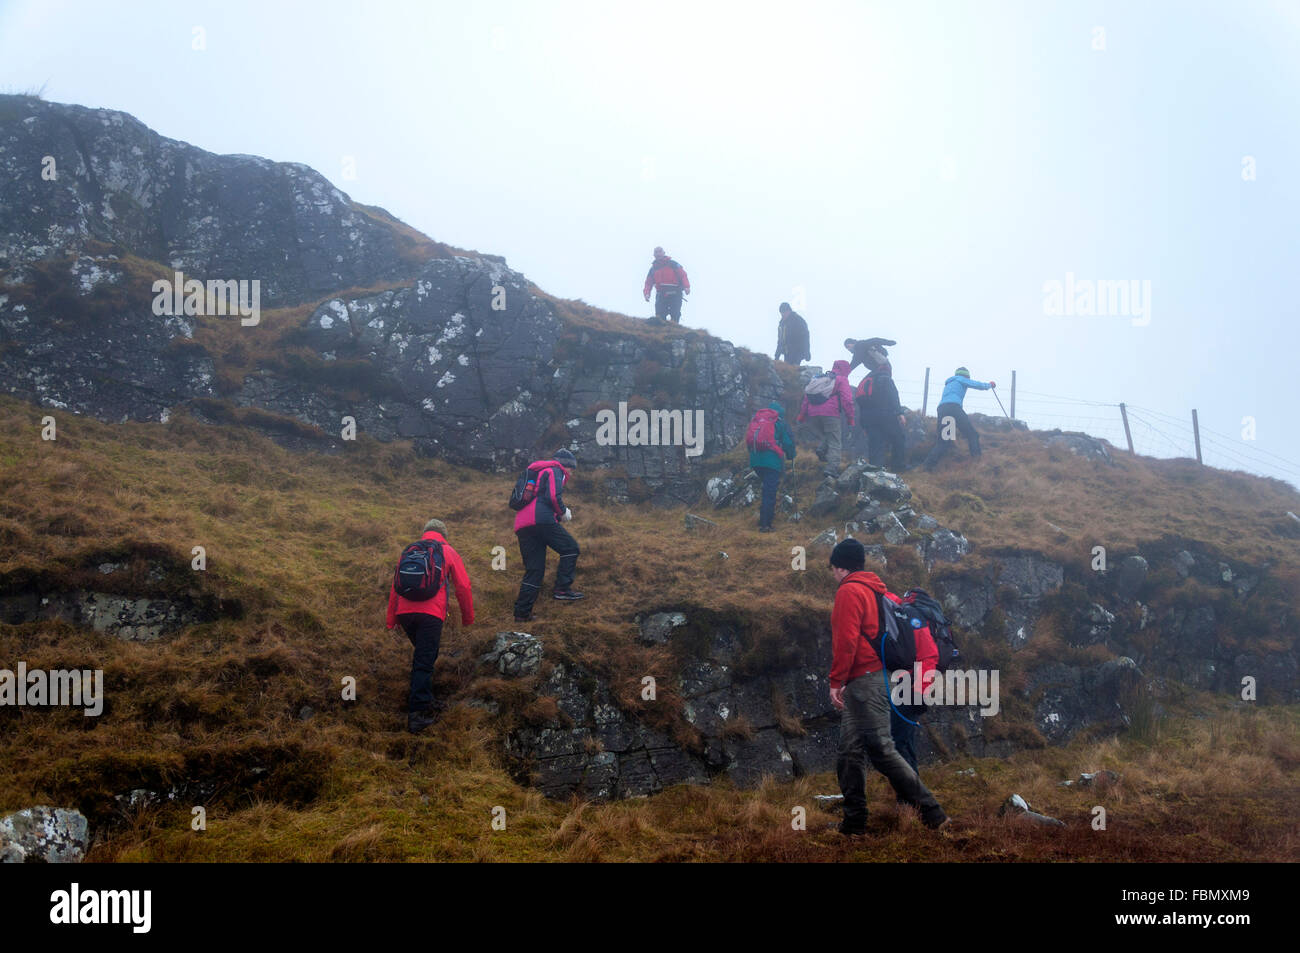 Walkers in mist on Common Mountain above Ardara, County Donegal, Ireland Stock Photo